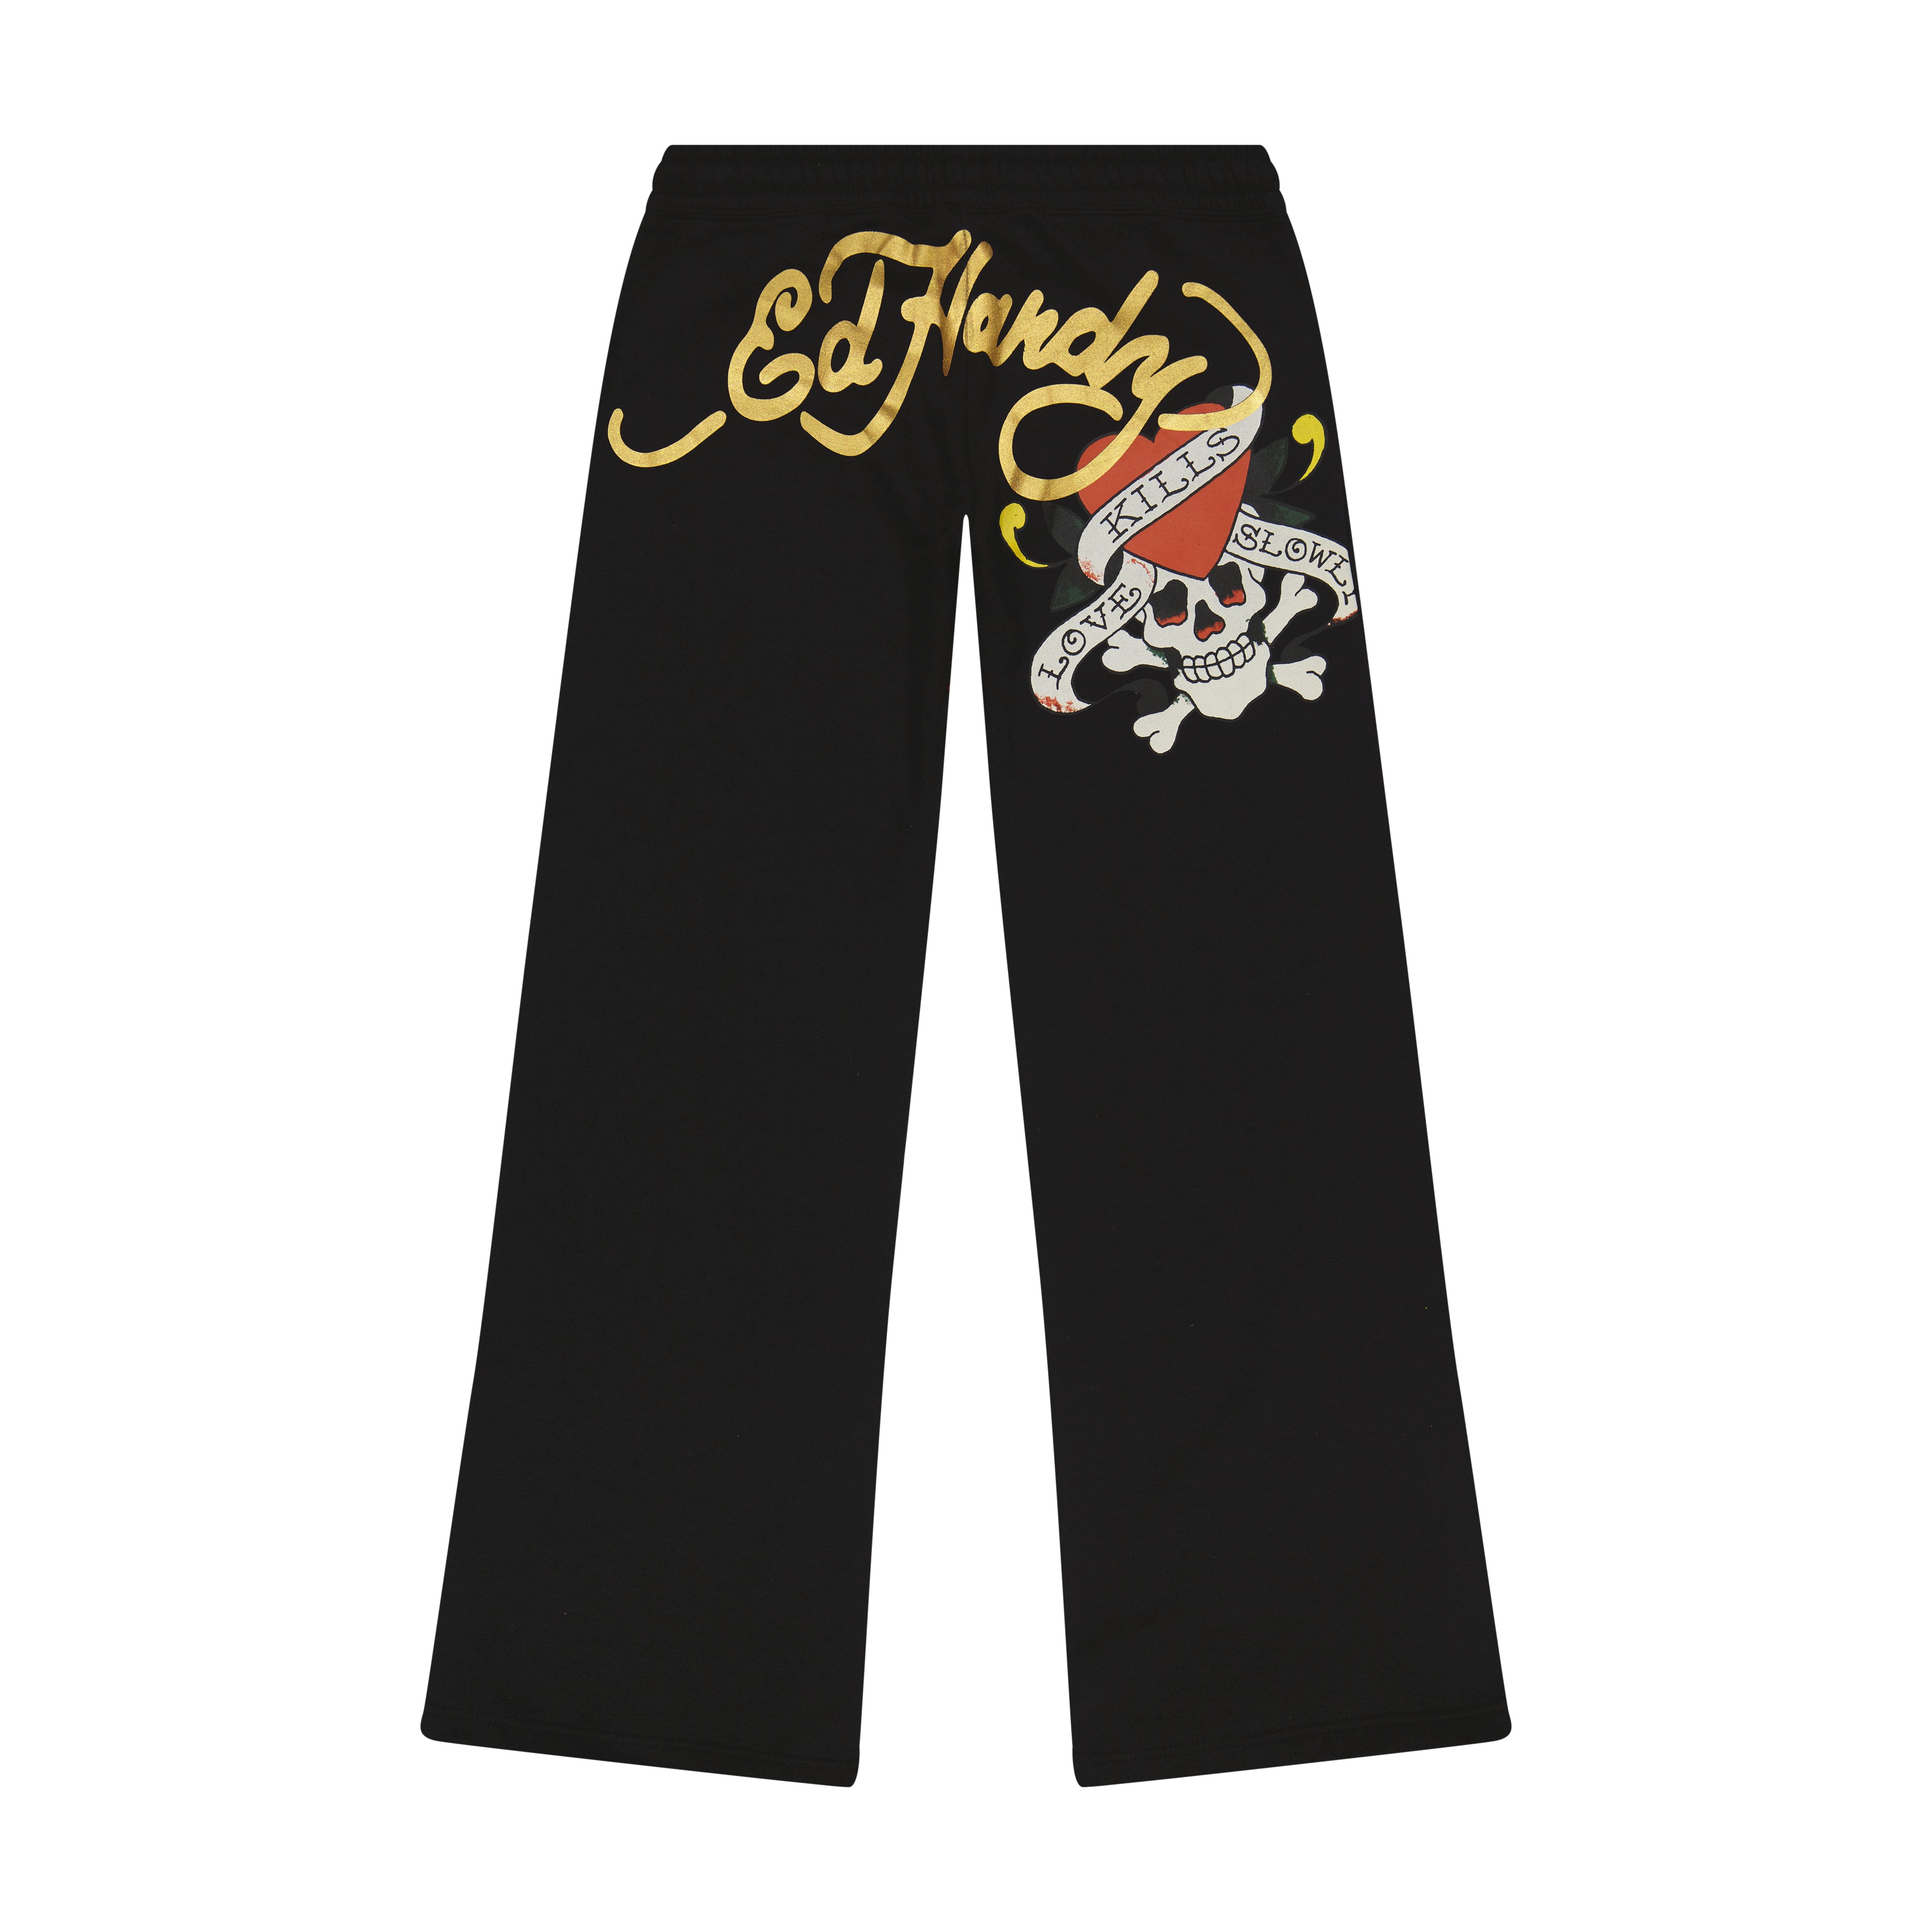 Black flare pants / Baggy jeans winter / Ed Hardy clothing